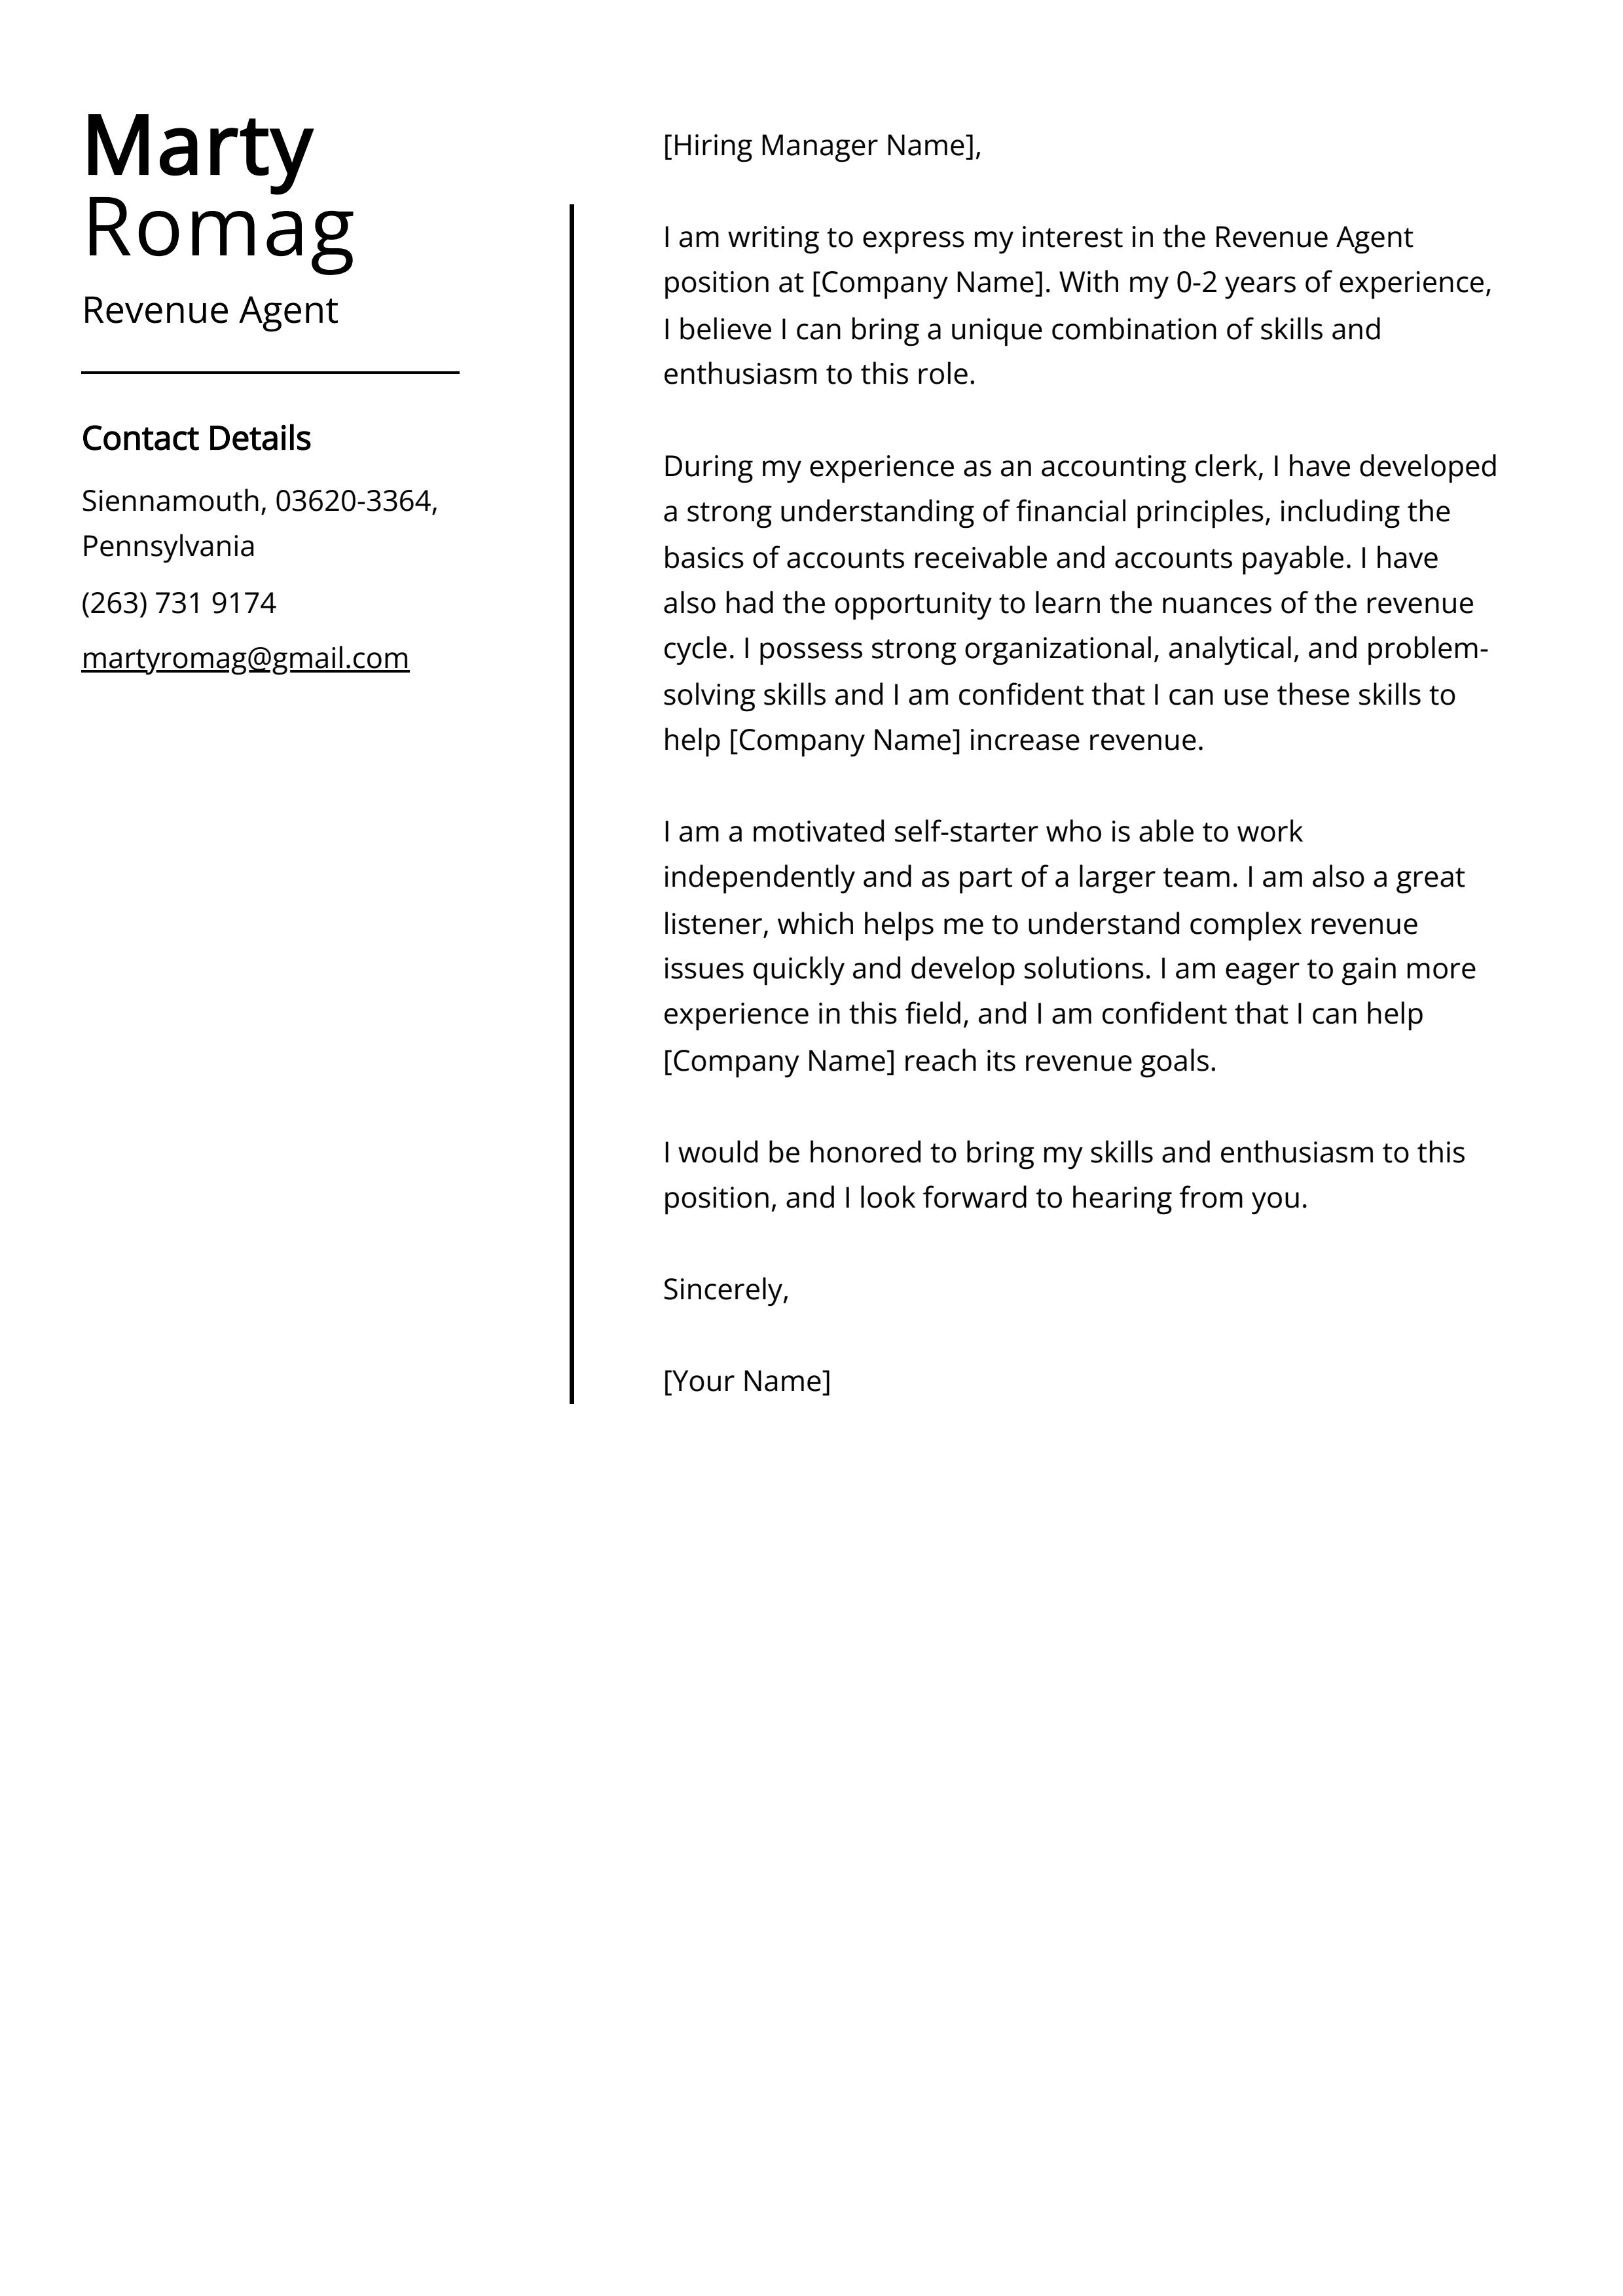 Revenue Agent Cover Letter Example